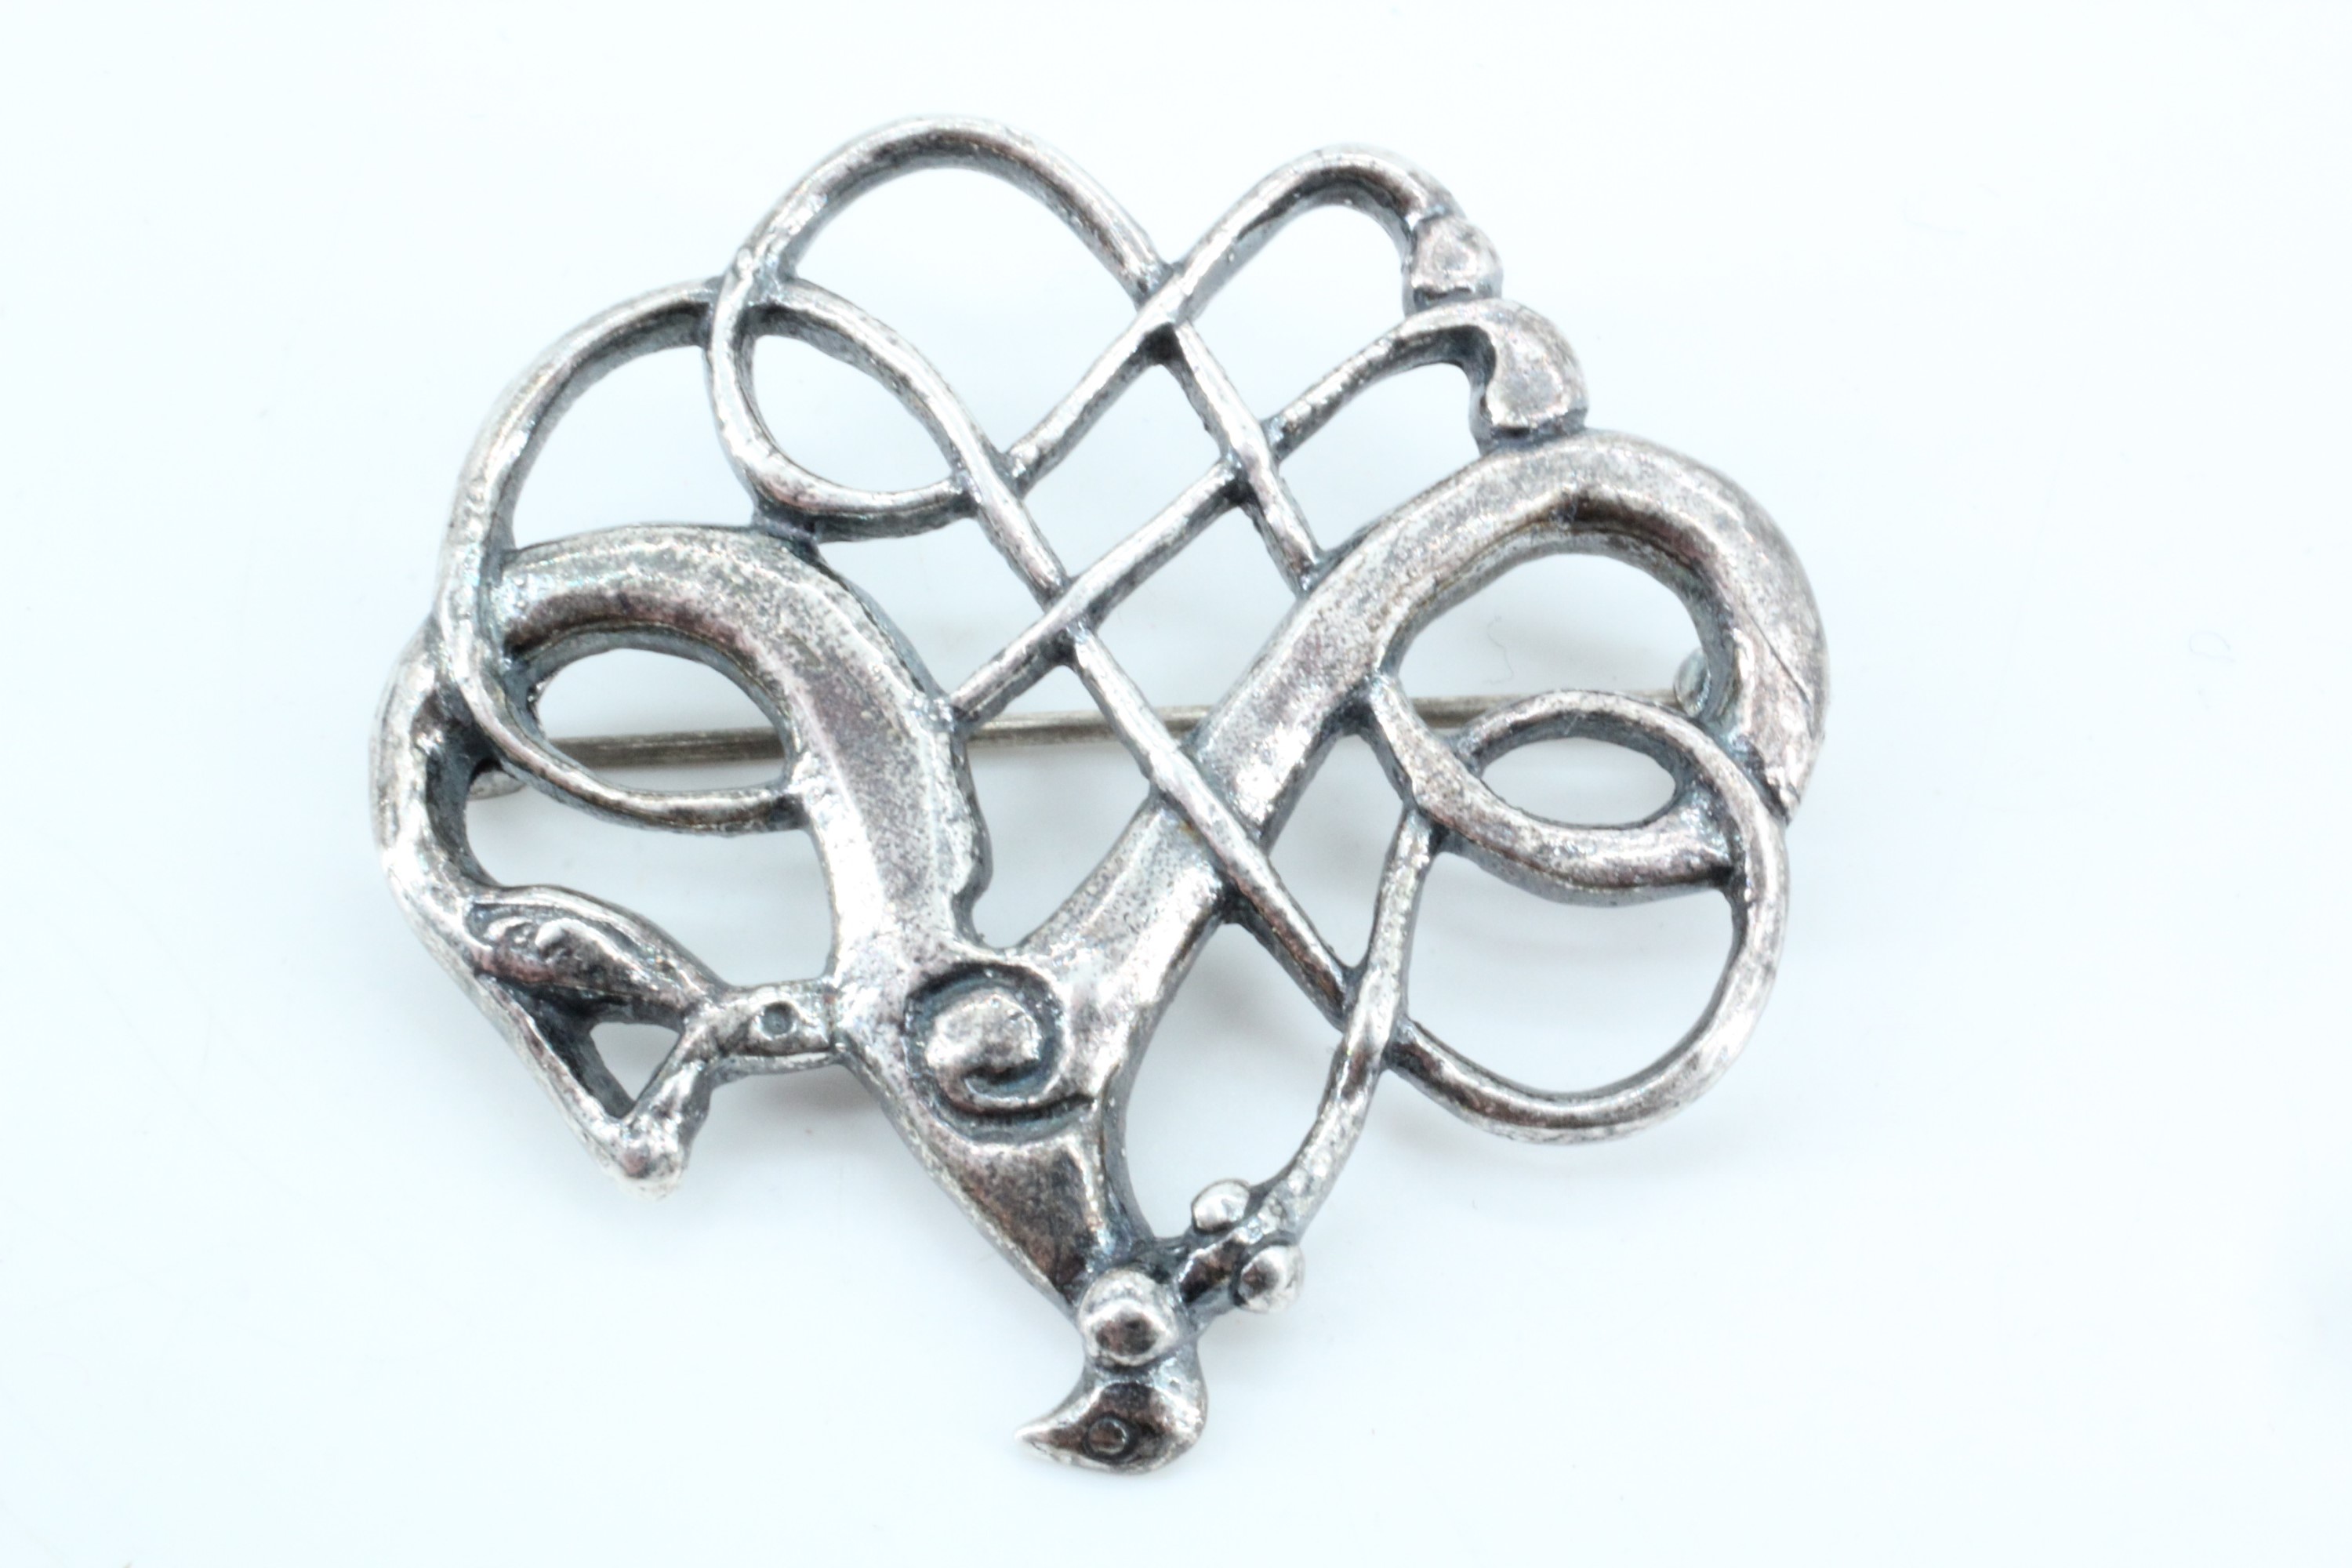 David-Anderson, a brooch from the Saga series in the manner of a Viking brooch, 1960s, marked